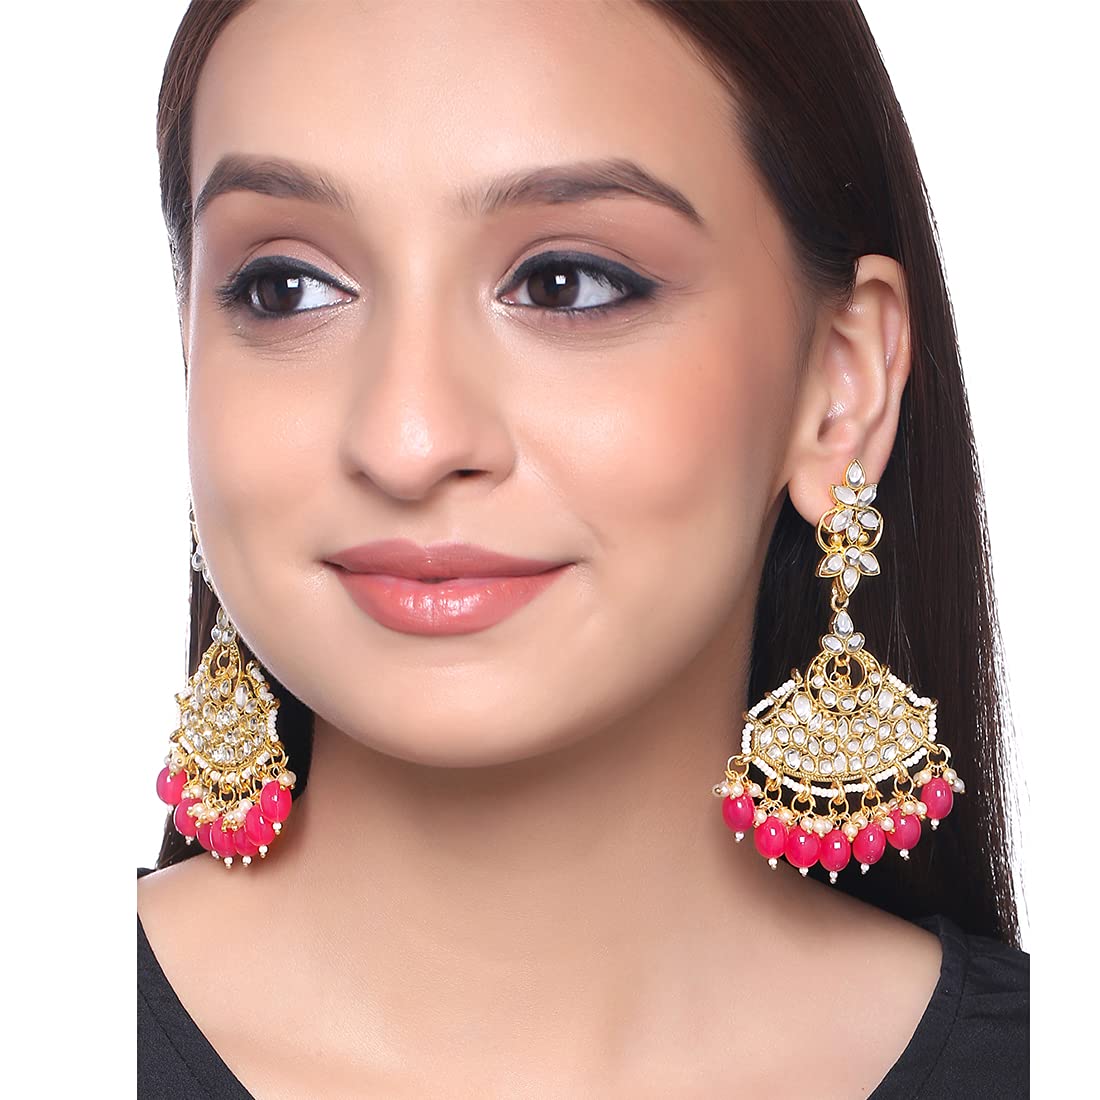 Yellow Chimes Ethnic Gold Plated Traditional Kundan Studded Pearl moti Pink Dangler Earrings for Women and Girls, Gold, Pink, Medium (Model: YCTJER-90LNGDG-PK)